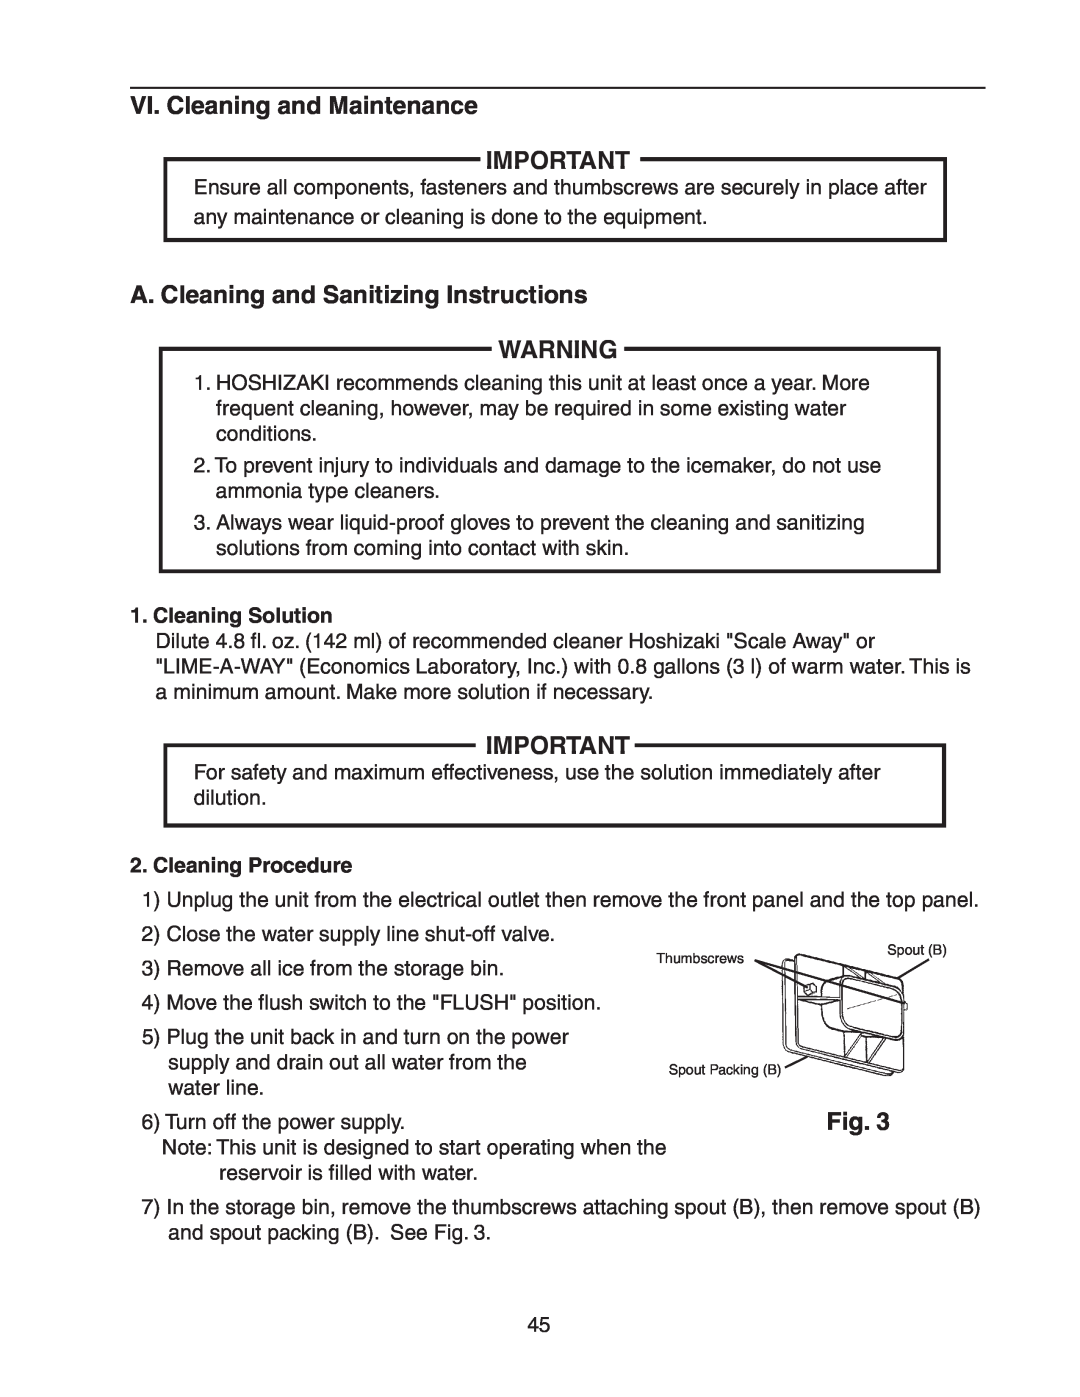 Hoshizaki F-300BAF service manual VI. Cleaning and Maintenance, A. Cleaning and Sanitizing Instructions, Cleaning Solution 